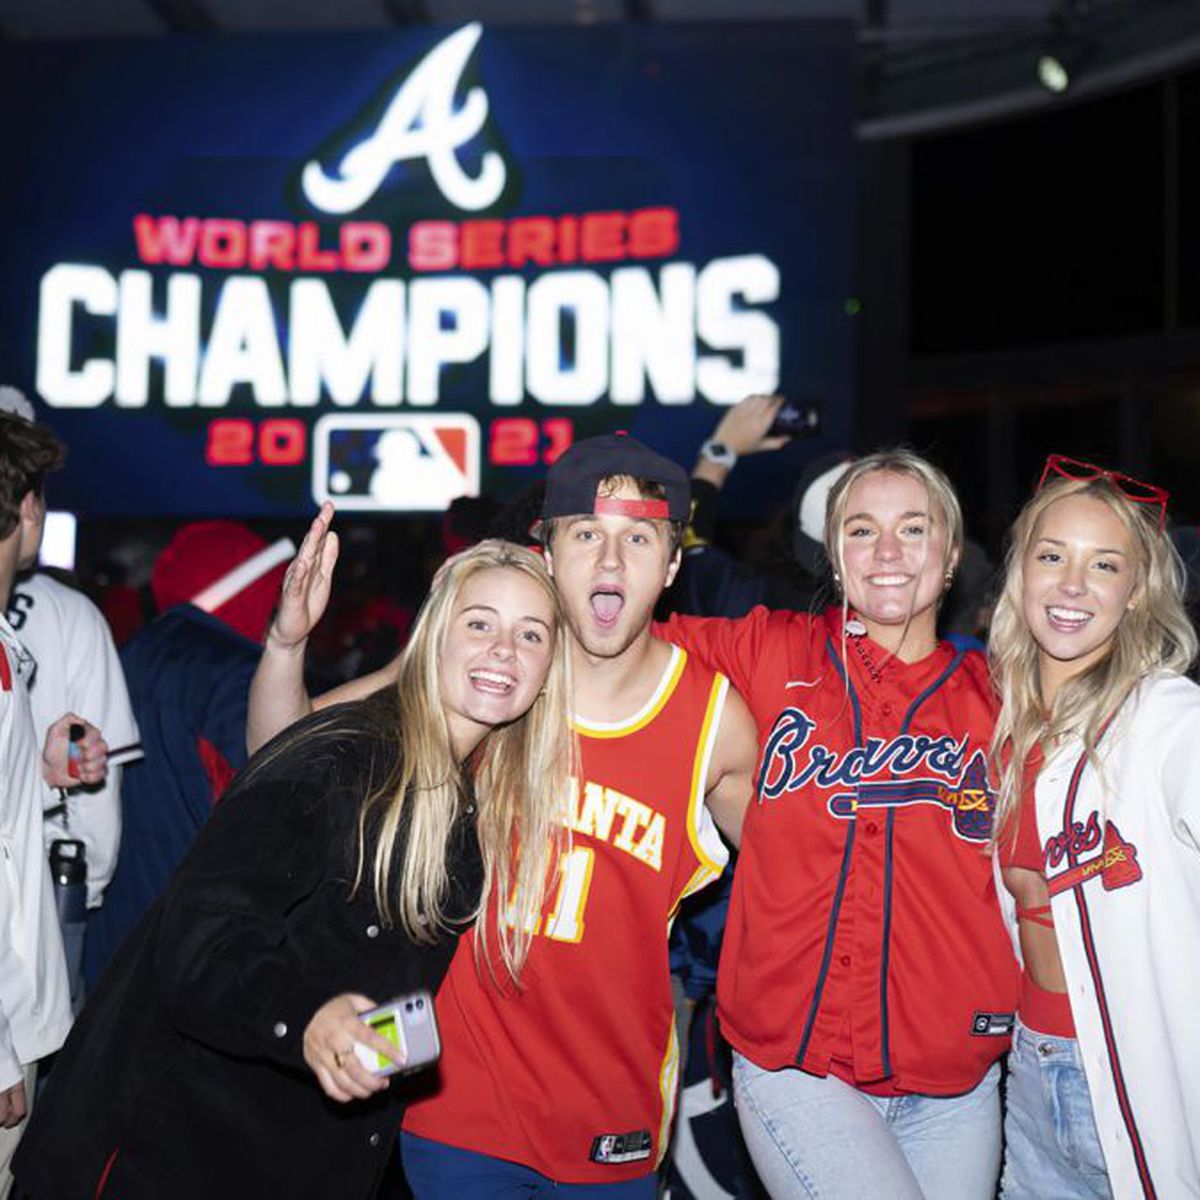 Braves to host World Series Championship parade and celebration